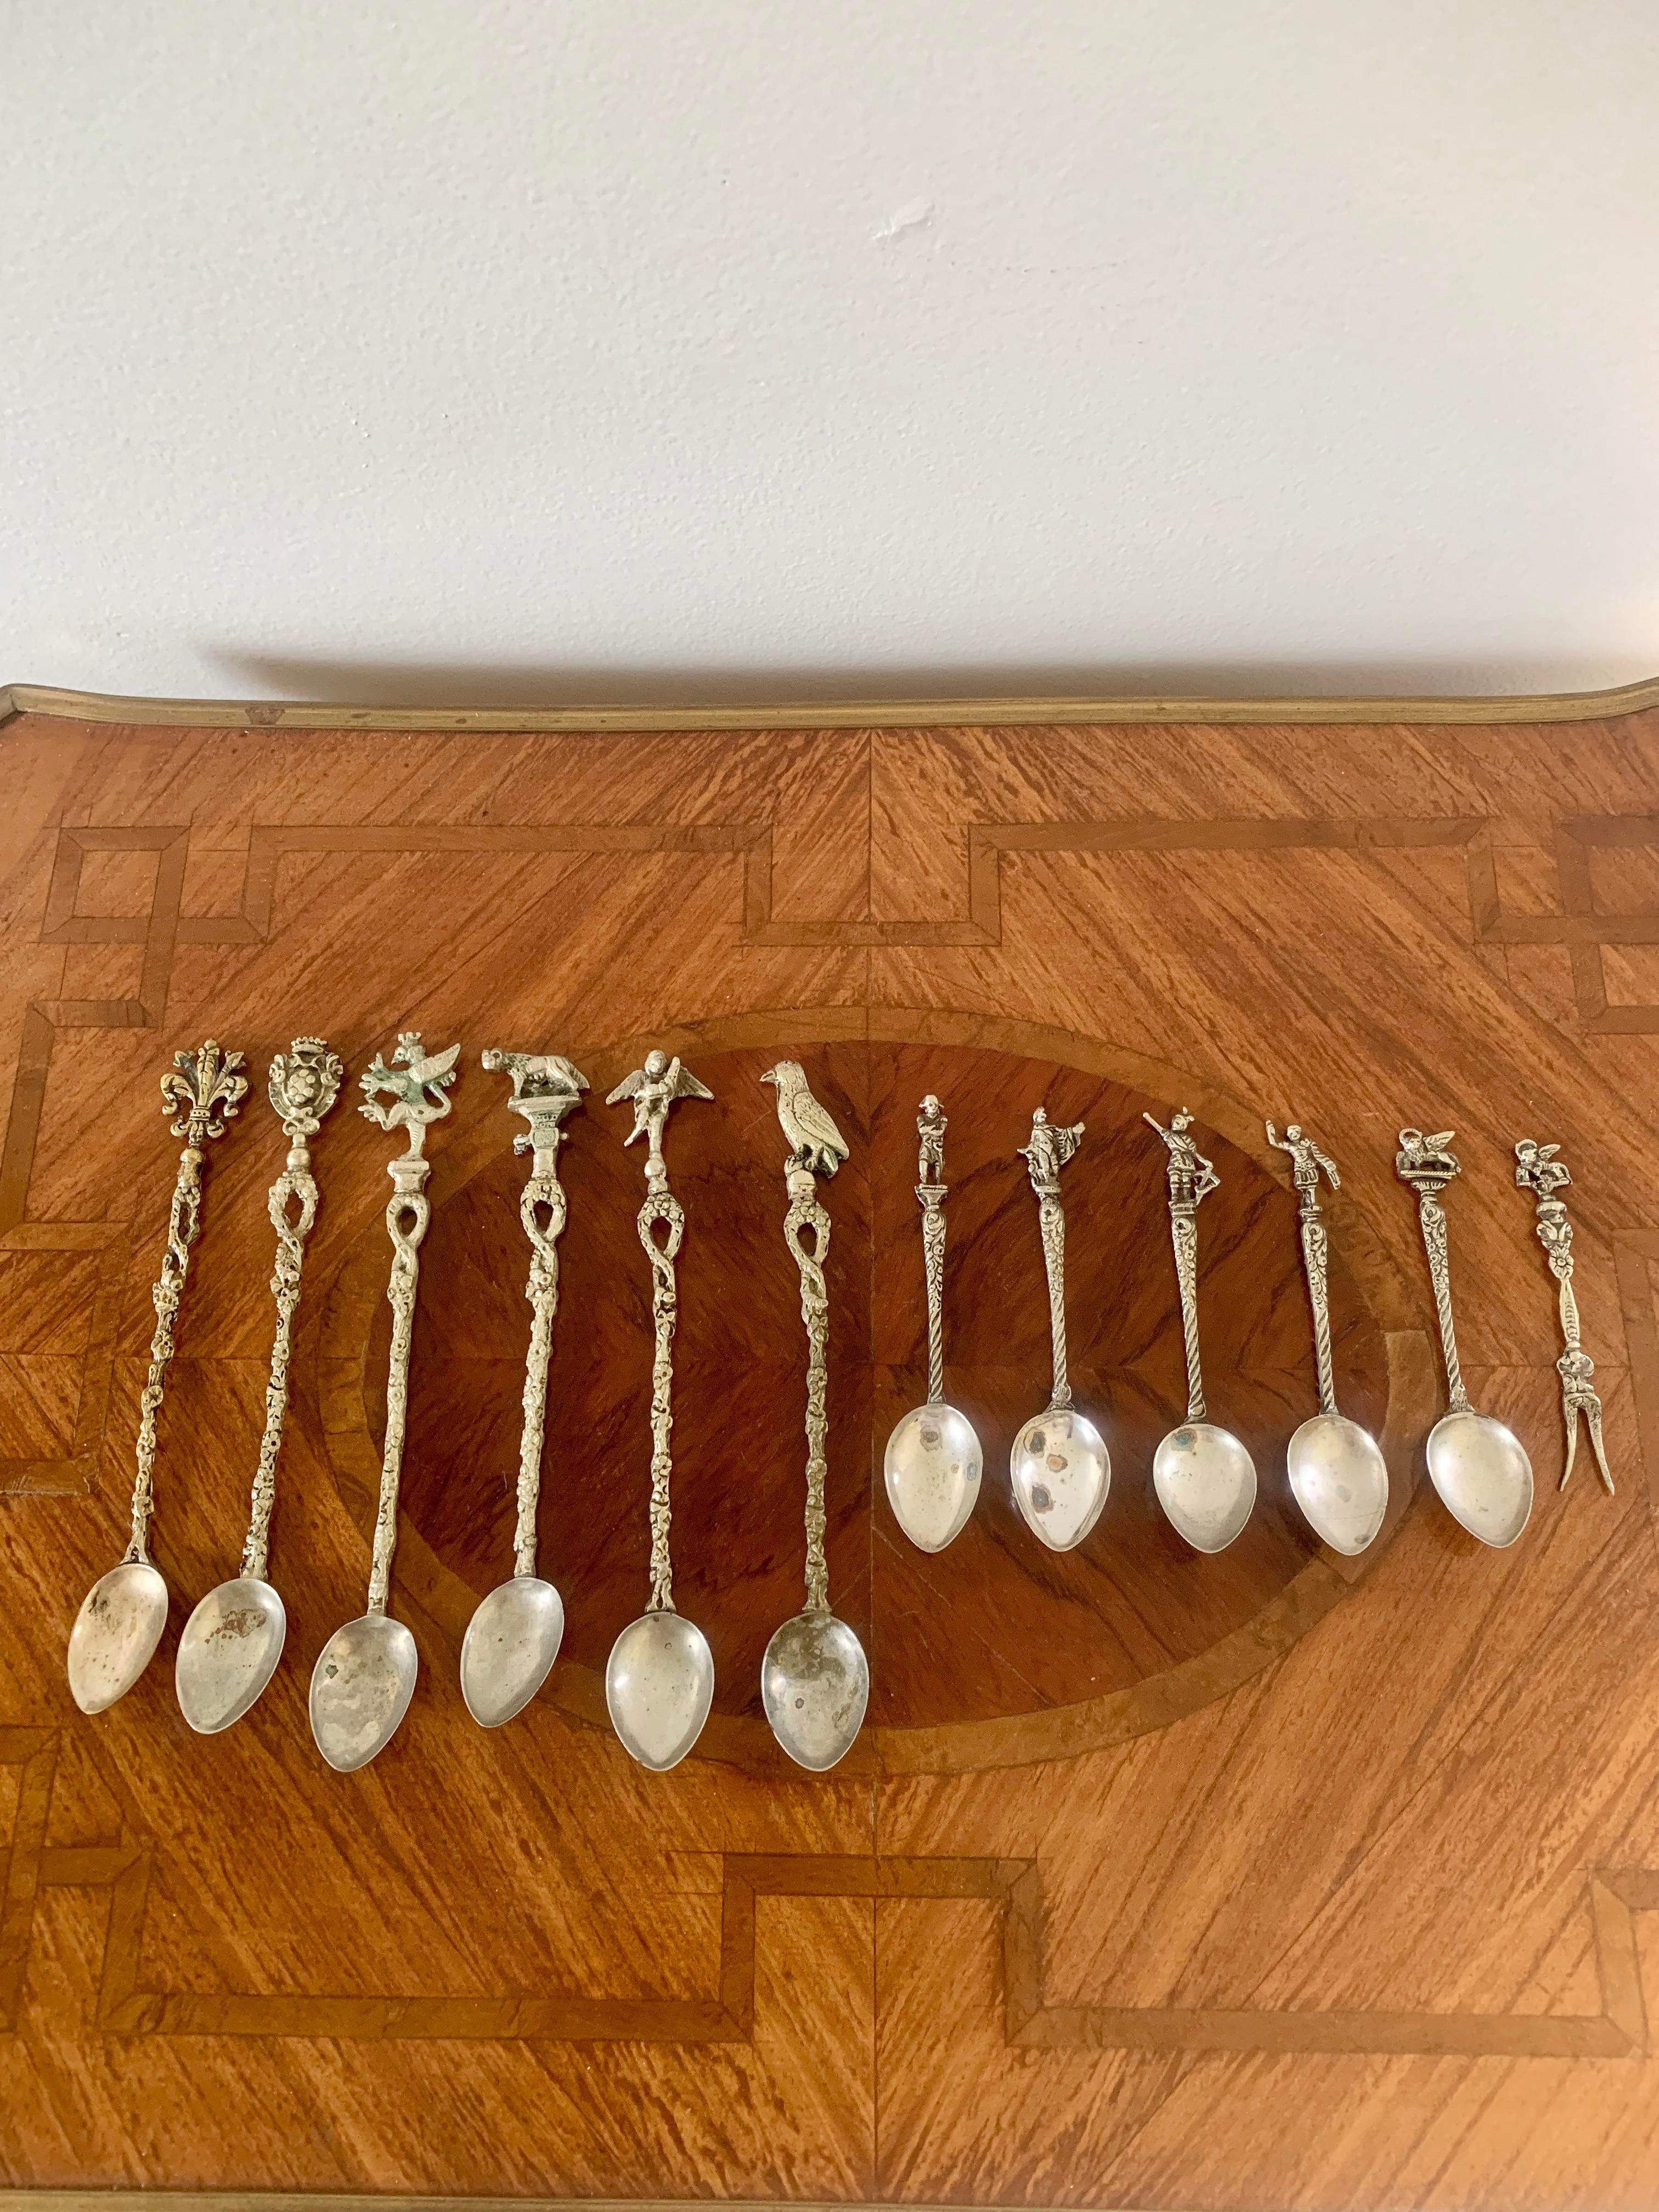 A set of 11 silver plate spoons and 1 cocktail fork with Italian landmarks and crests in the Grand Tour style. Made in Italy and marked Alpak.
Large: 7